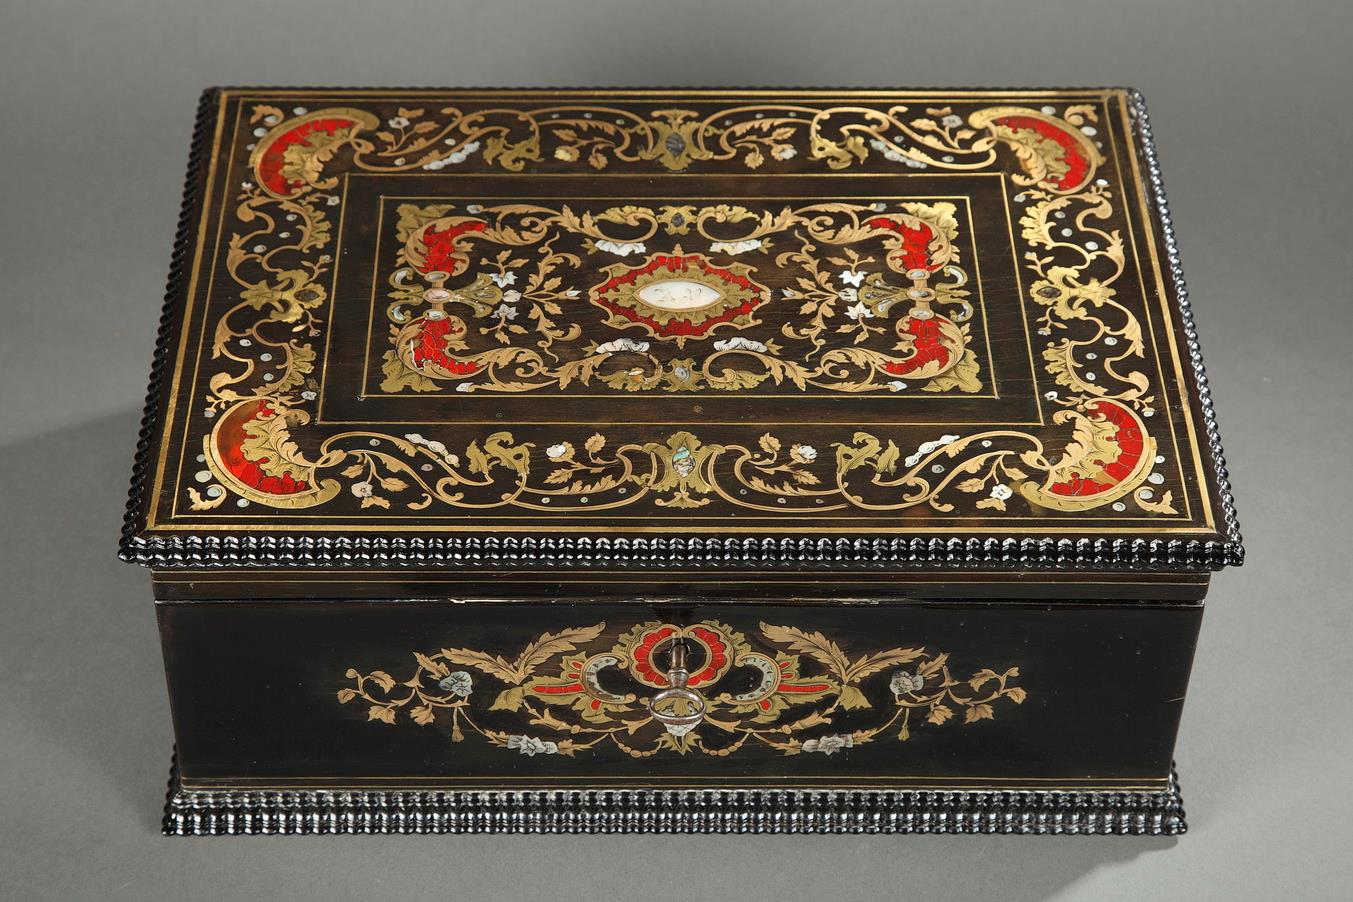 MID-19TH CENTURY WOODEN COFFER INLAID WITH MOTHER OF PEARL.